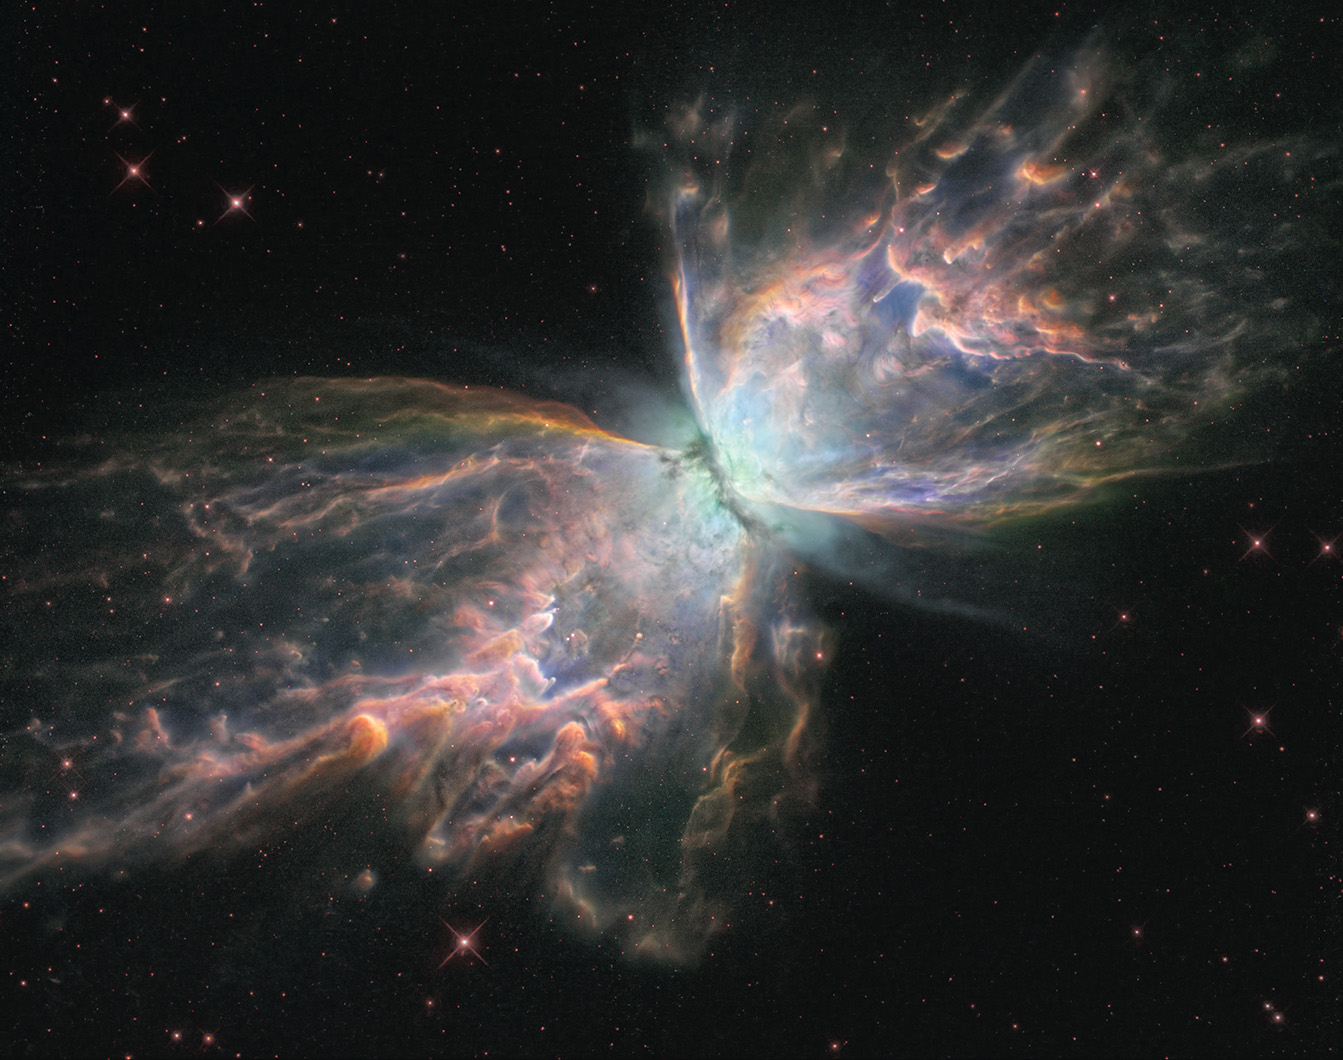 NGC 6302 - The Butterfly Image